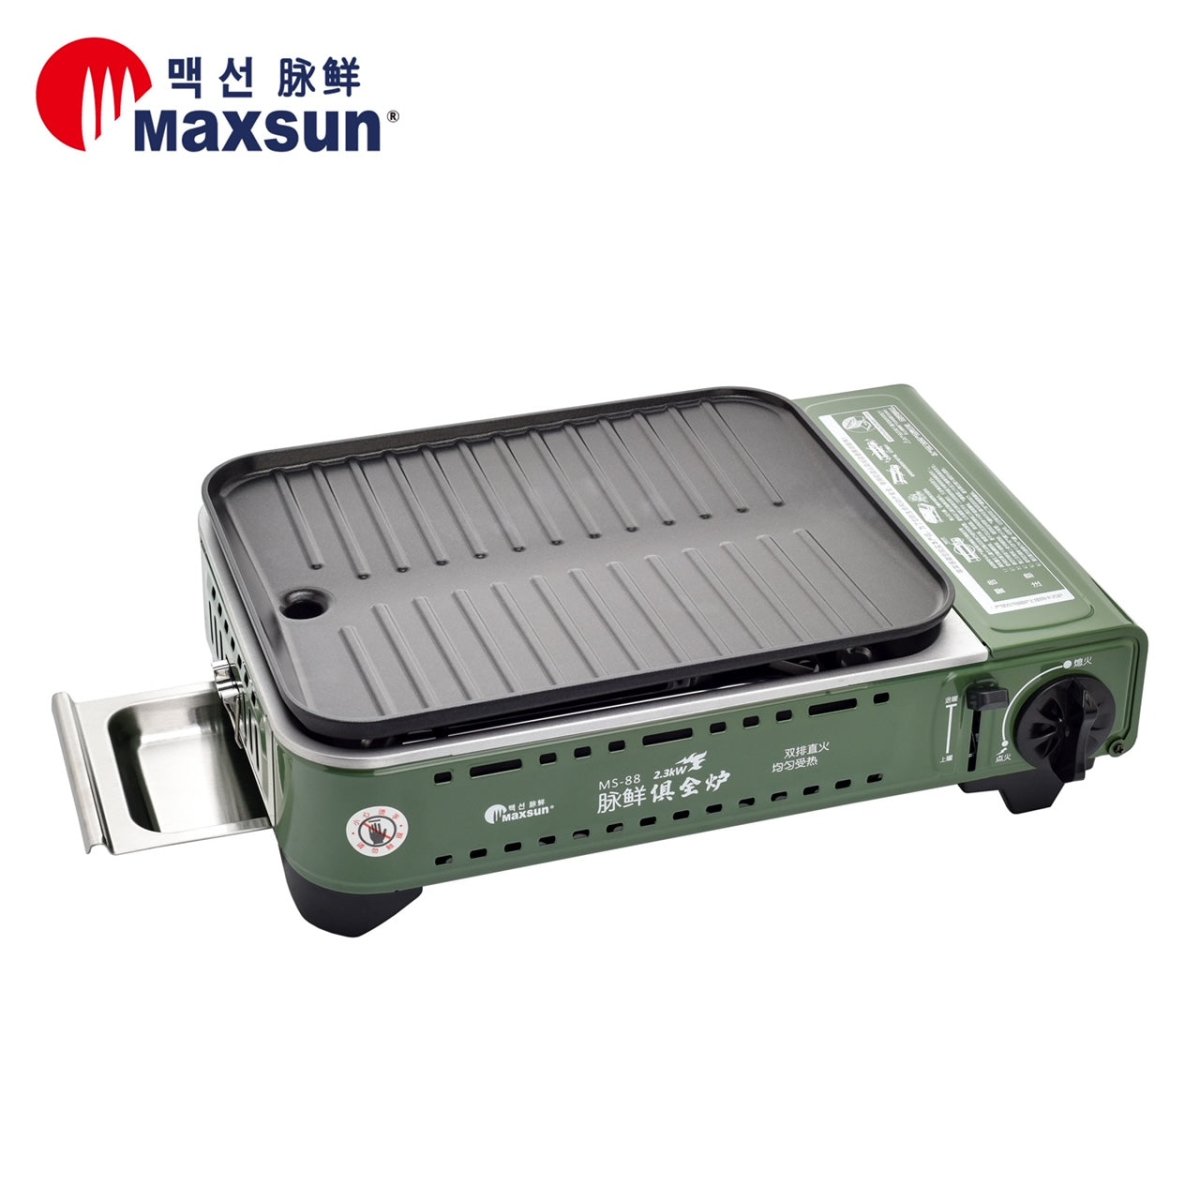 Portable Gas BBQ Stove PRO Grill Plate Burner Butane Camping Gas Cooker With Non Stick Pan and Lid